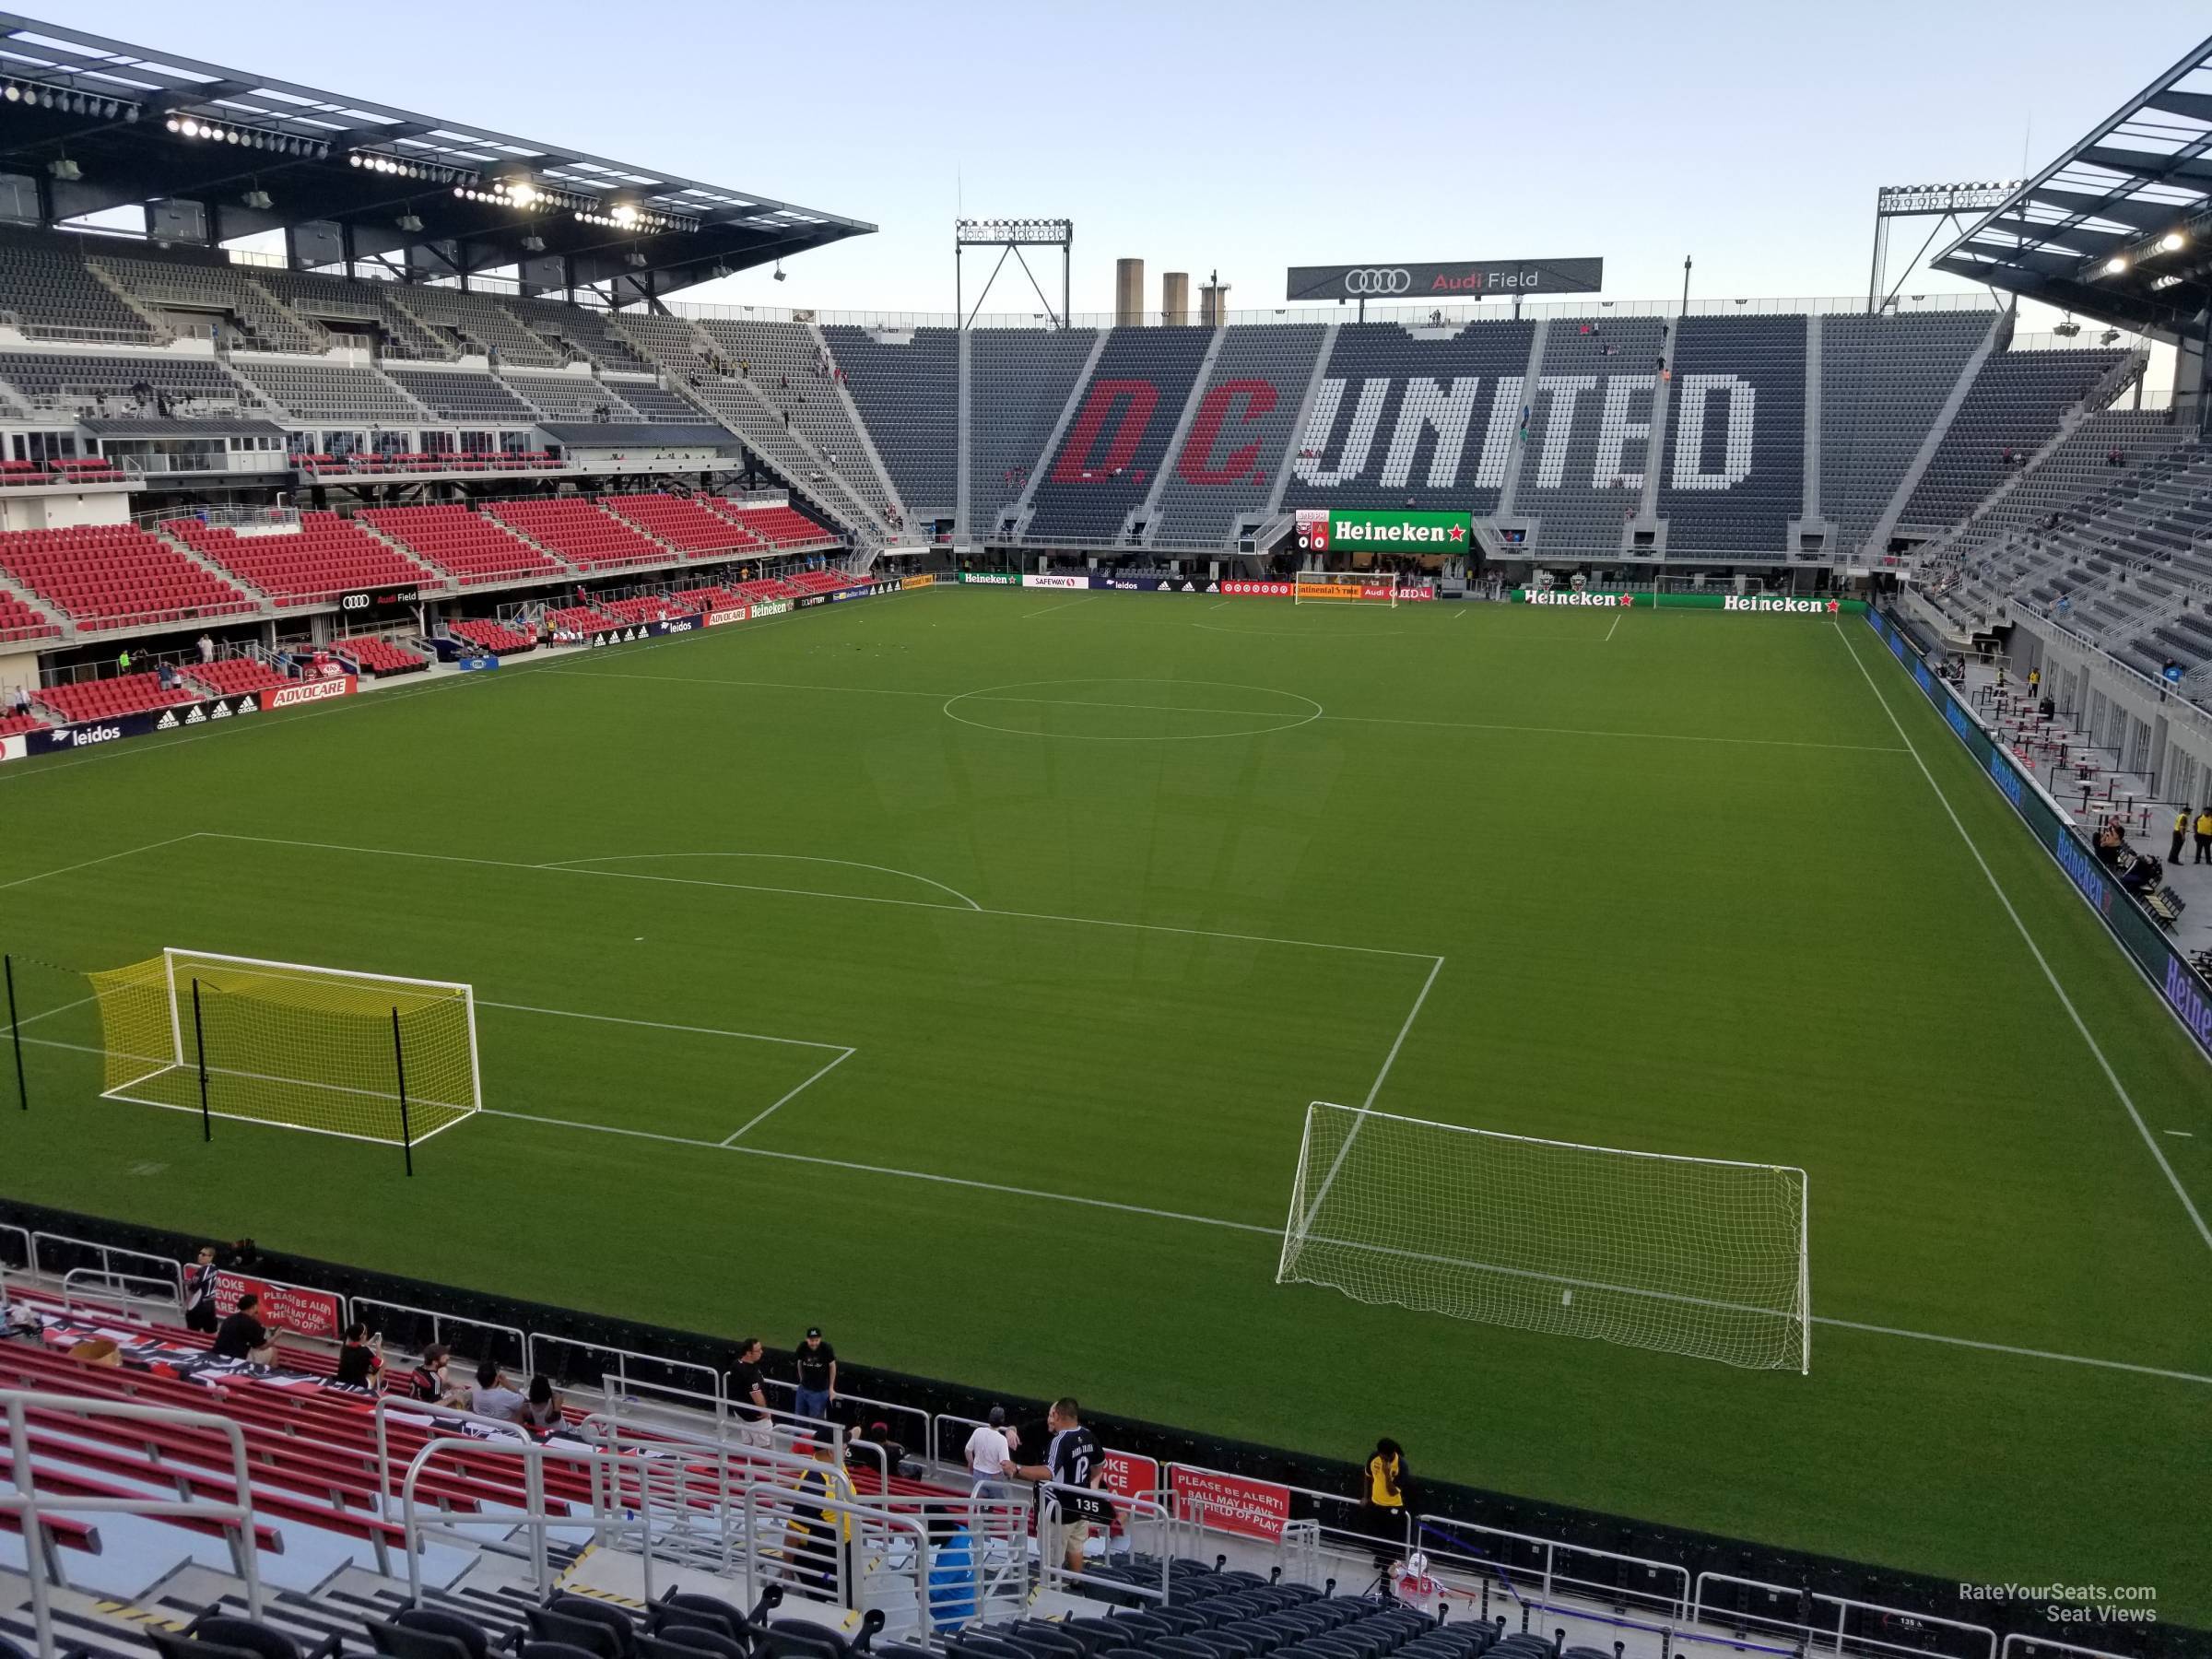 Section 135 at Audi Field - RateYourSeats.com